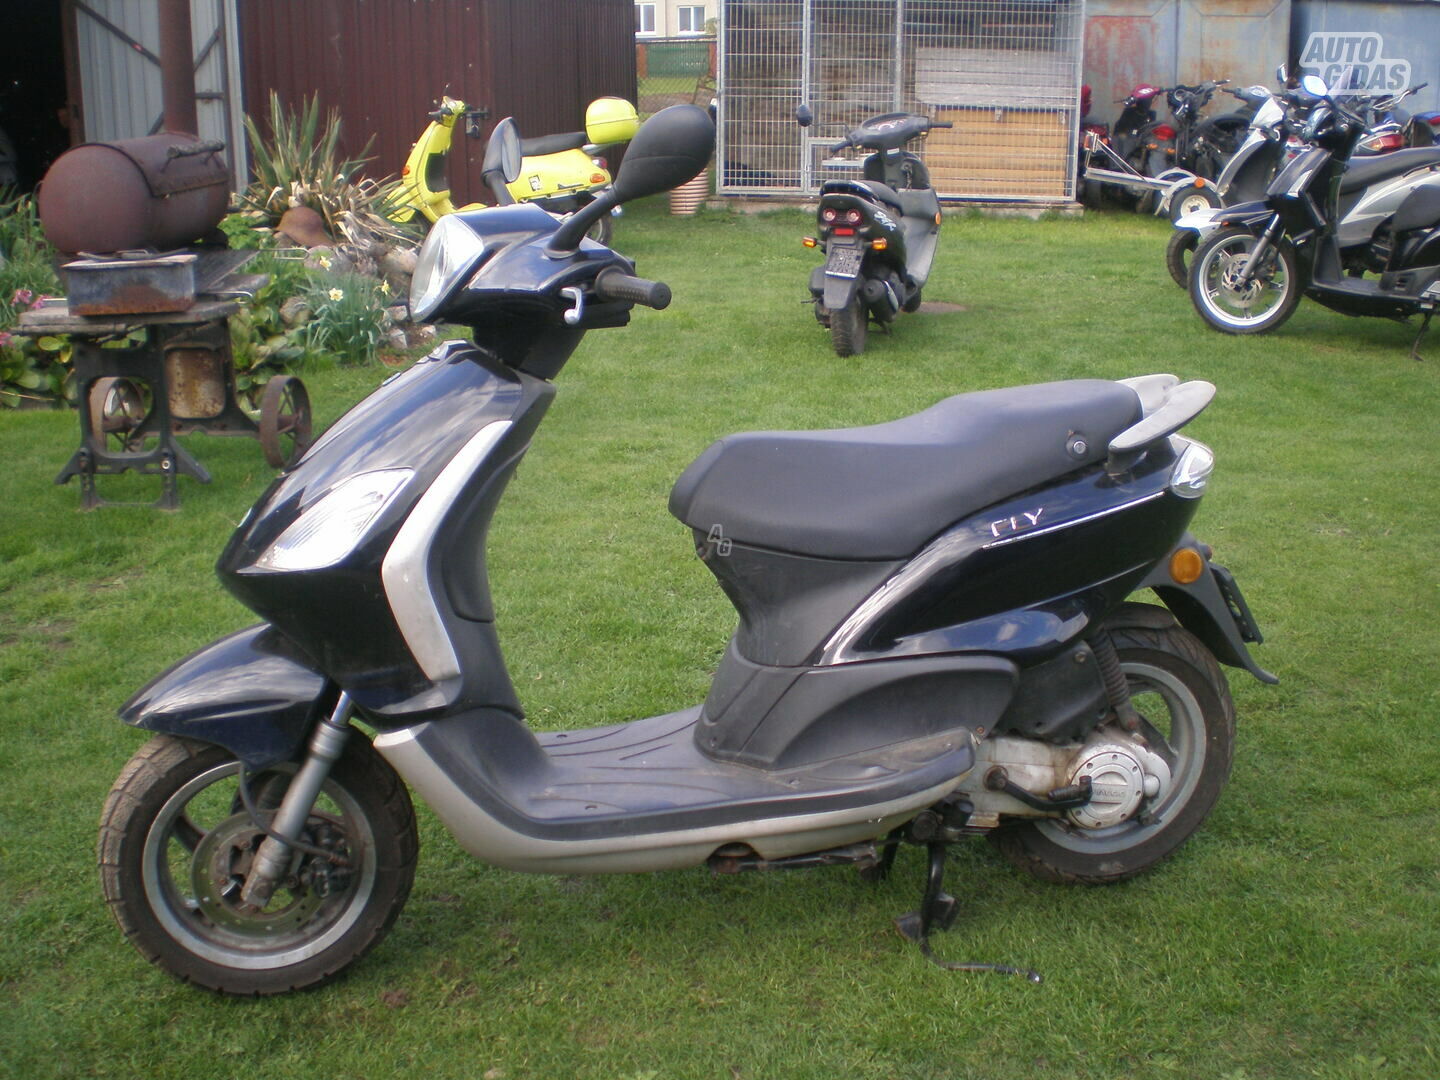 Piaggio FLY 2013 y Scooter / moped